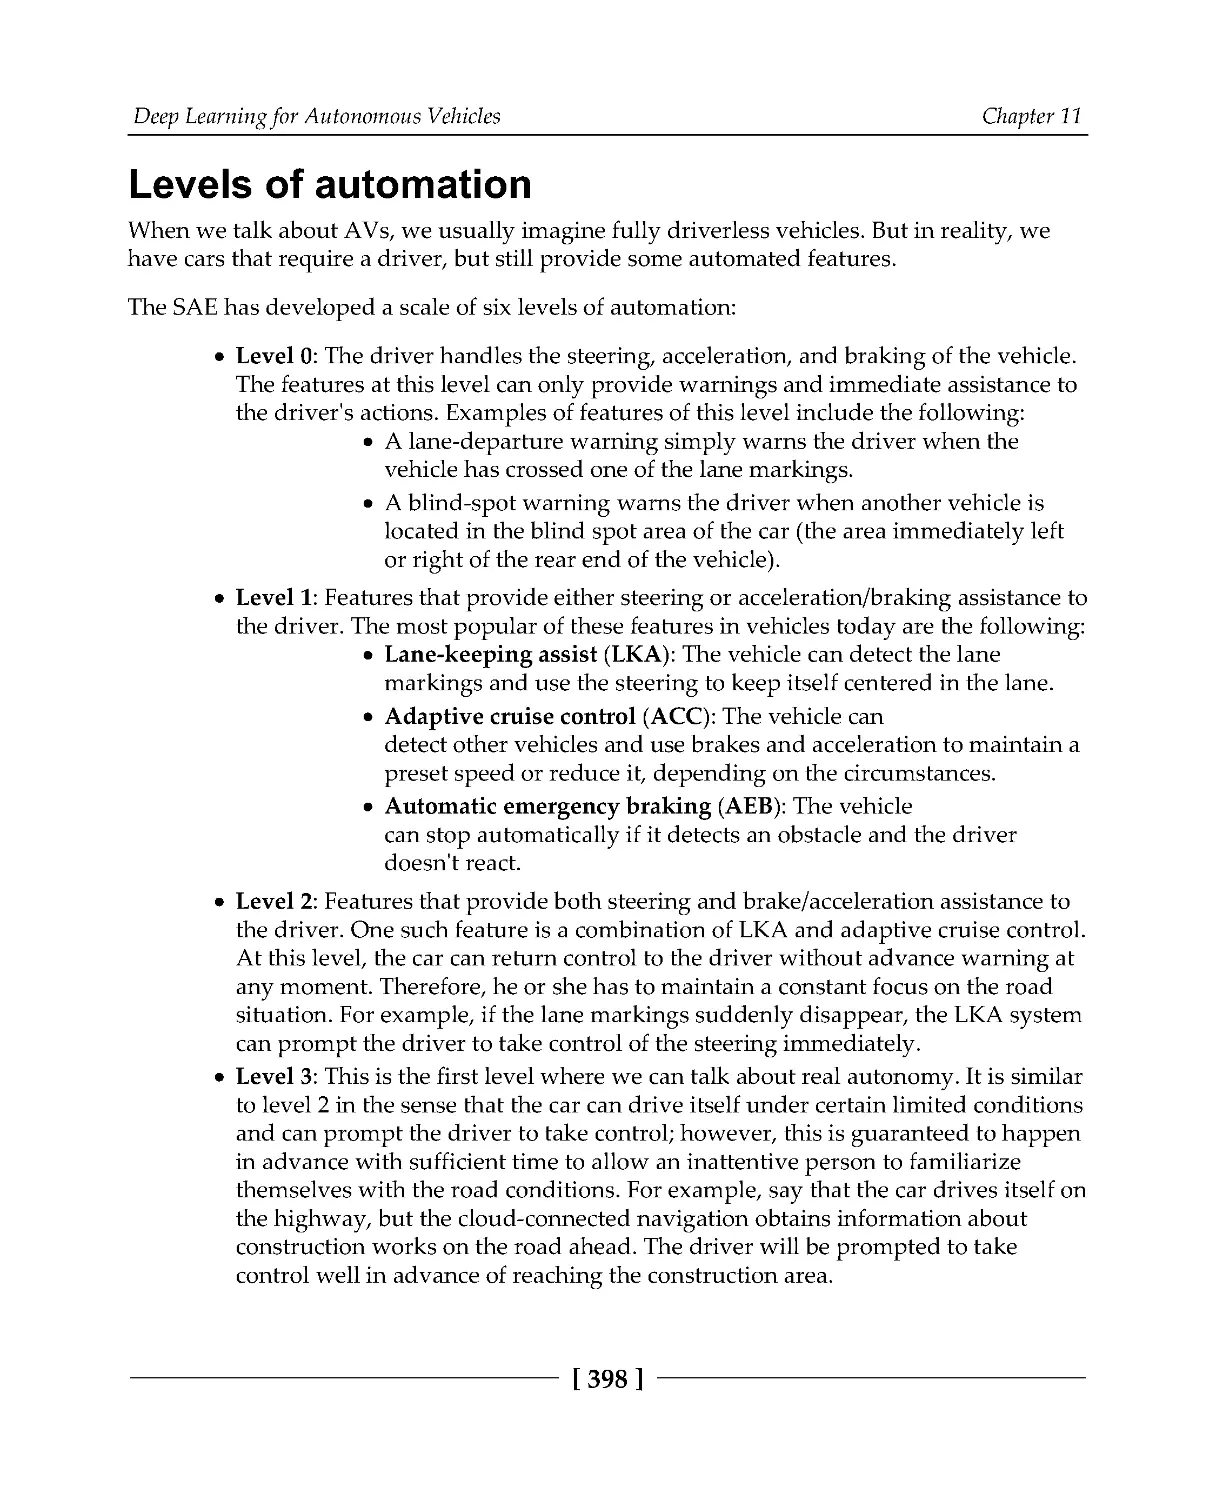 Levels of automation